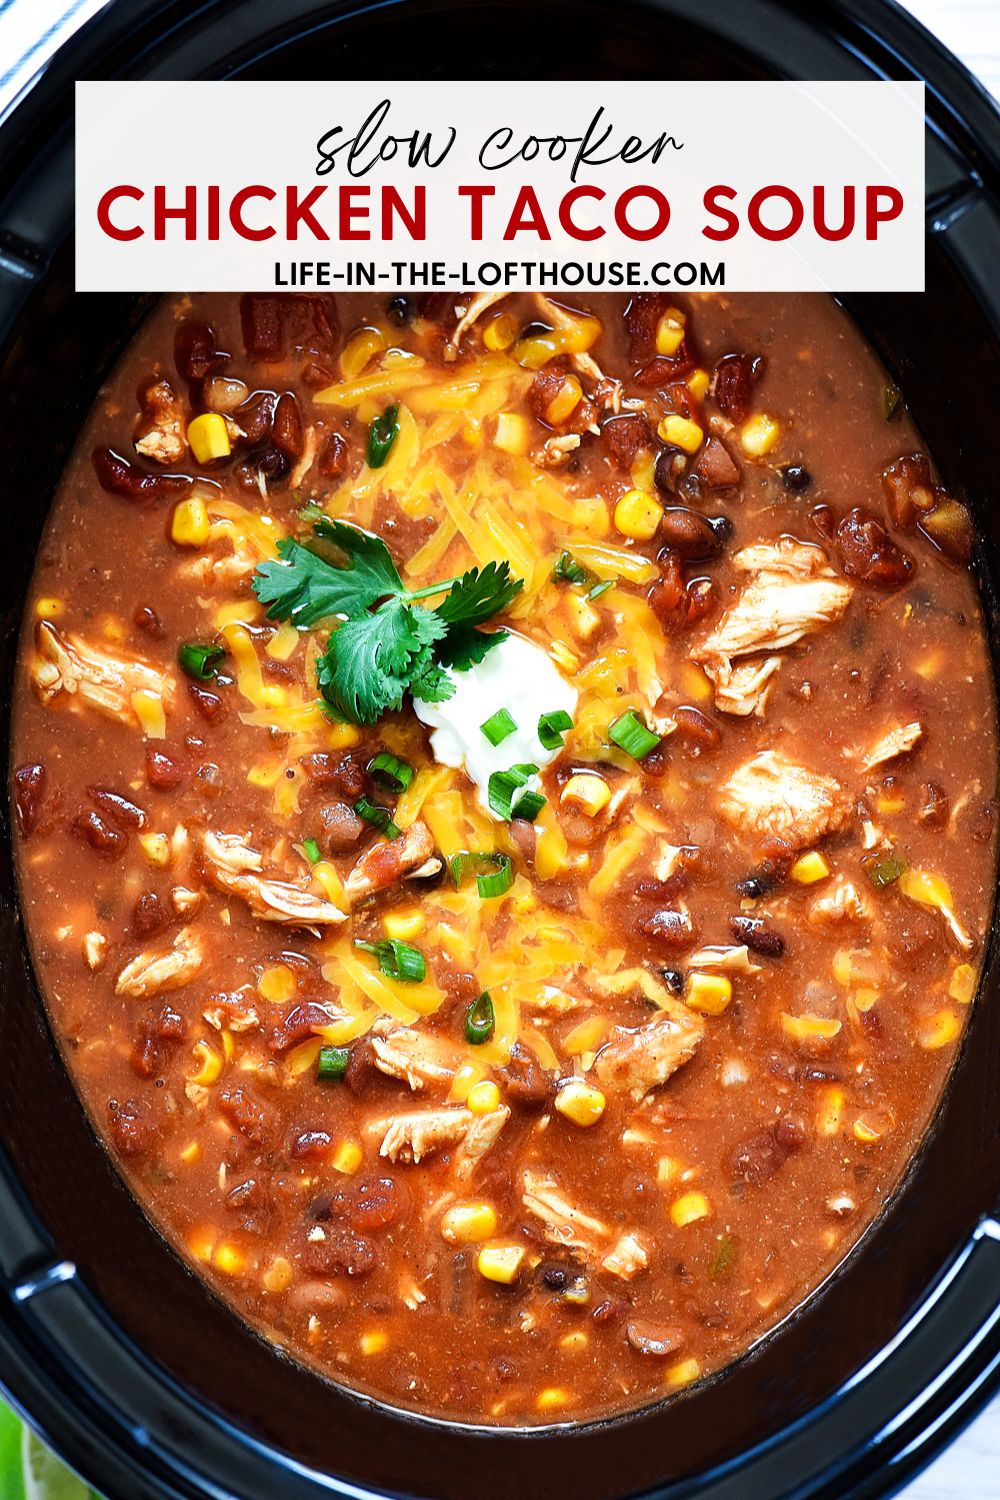 Chicken Taco Soup made in a slow cooker with chicken breasts, beans, corn, tomato sauce, chicken broth and taco seasoning. Life-in-the-Lofthouse.com